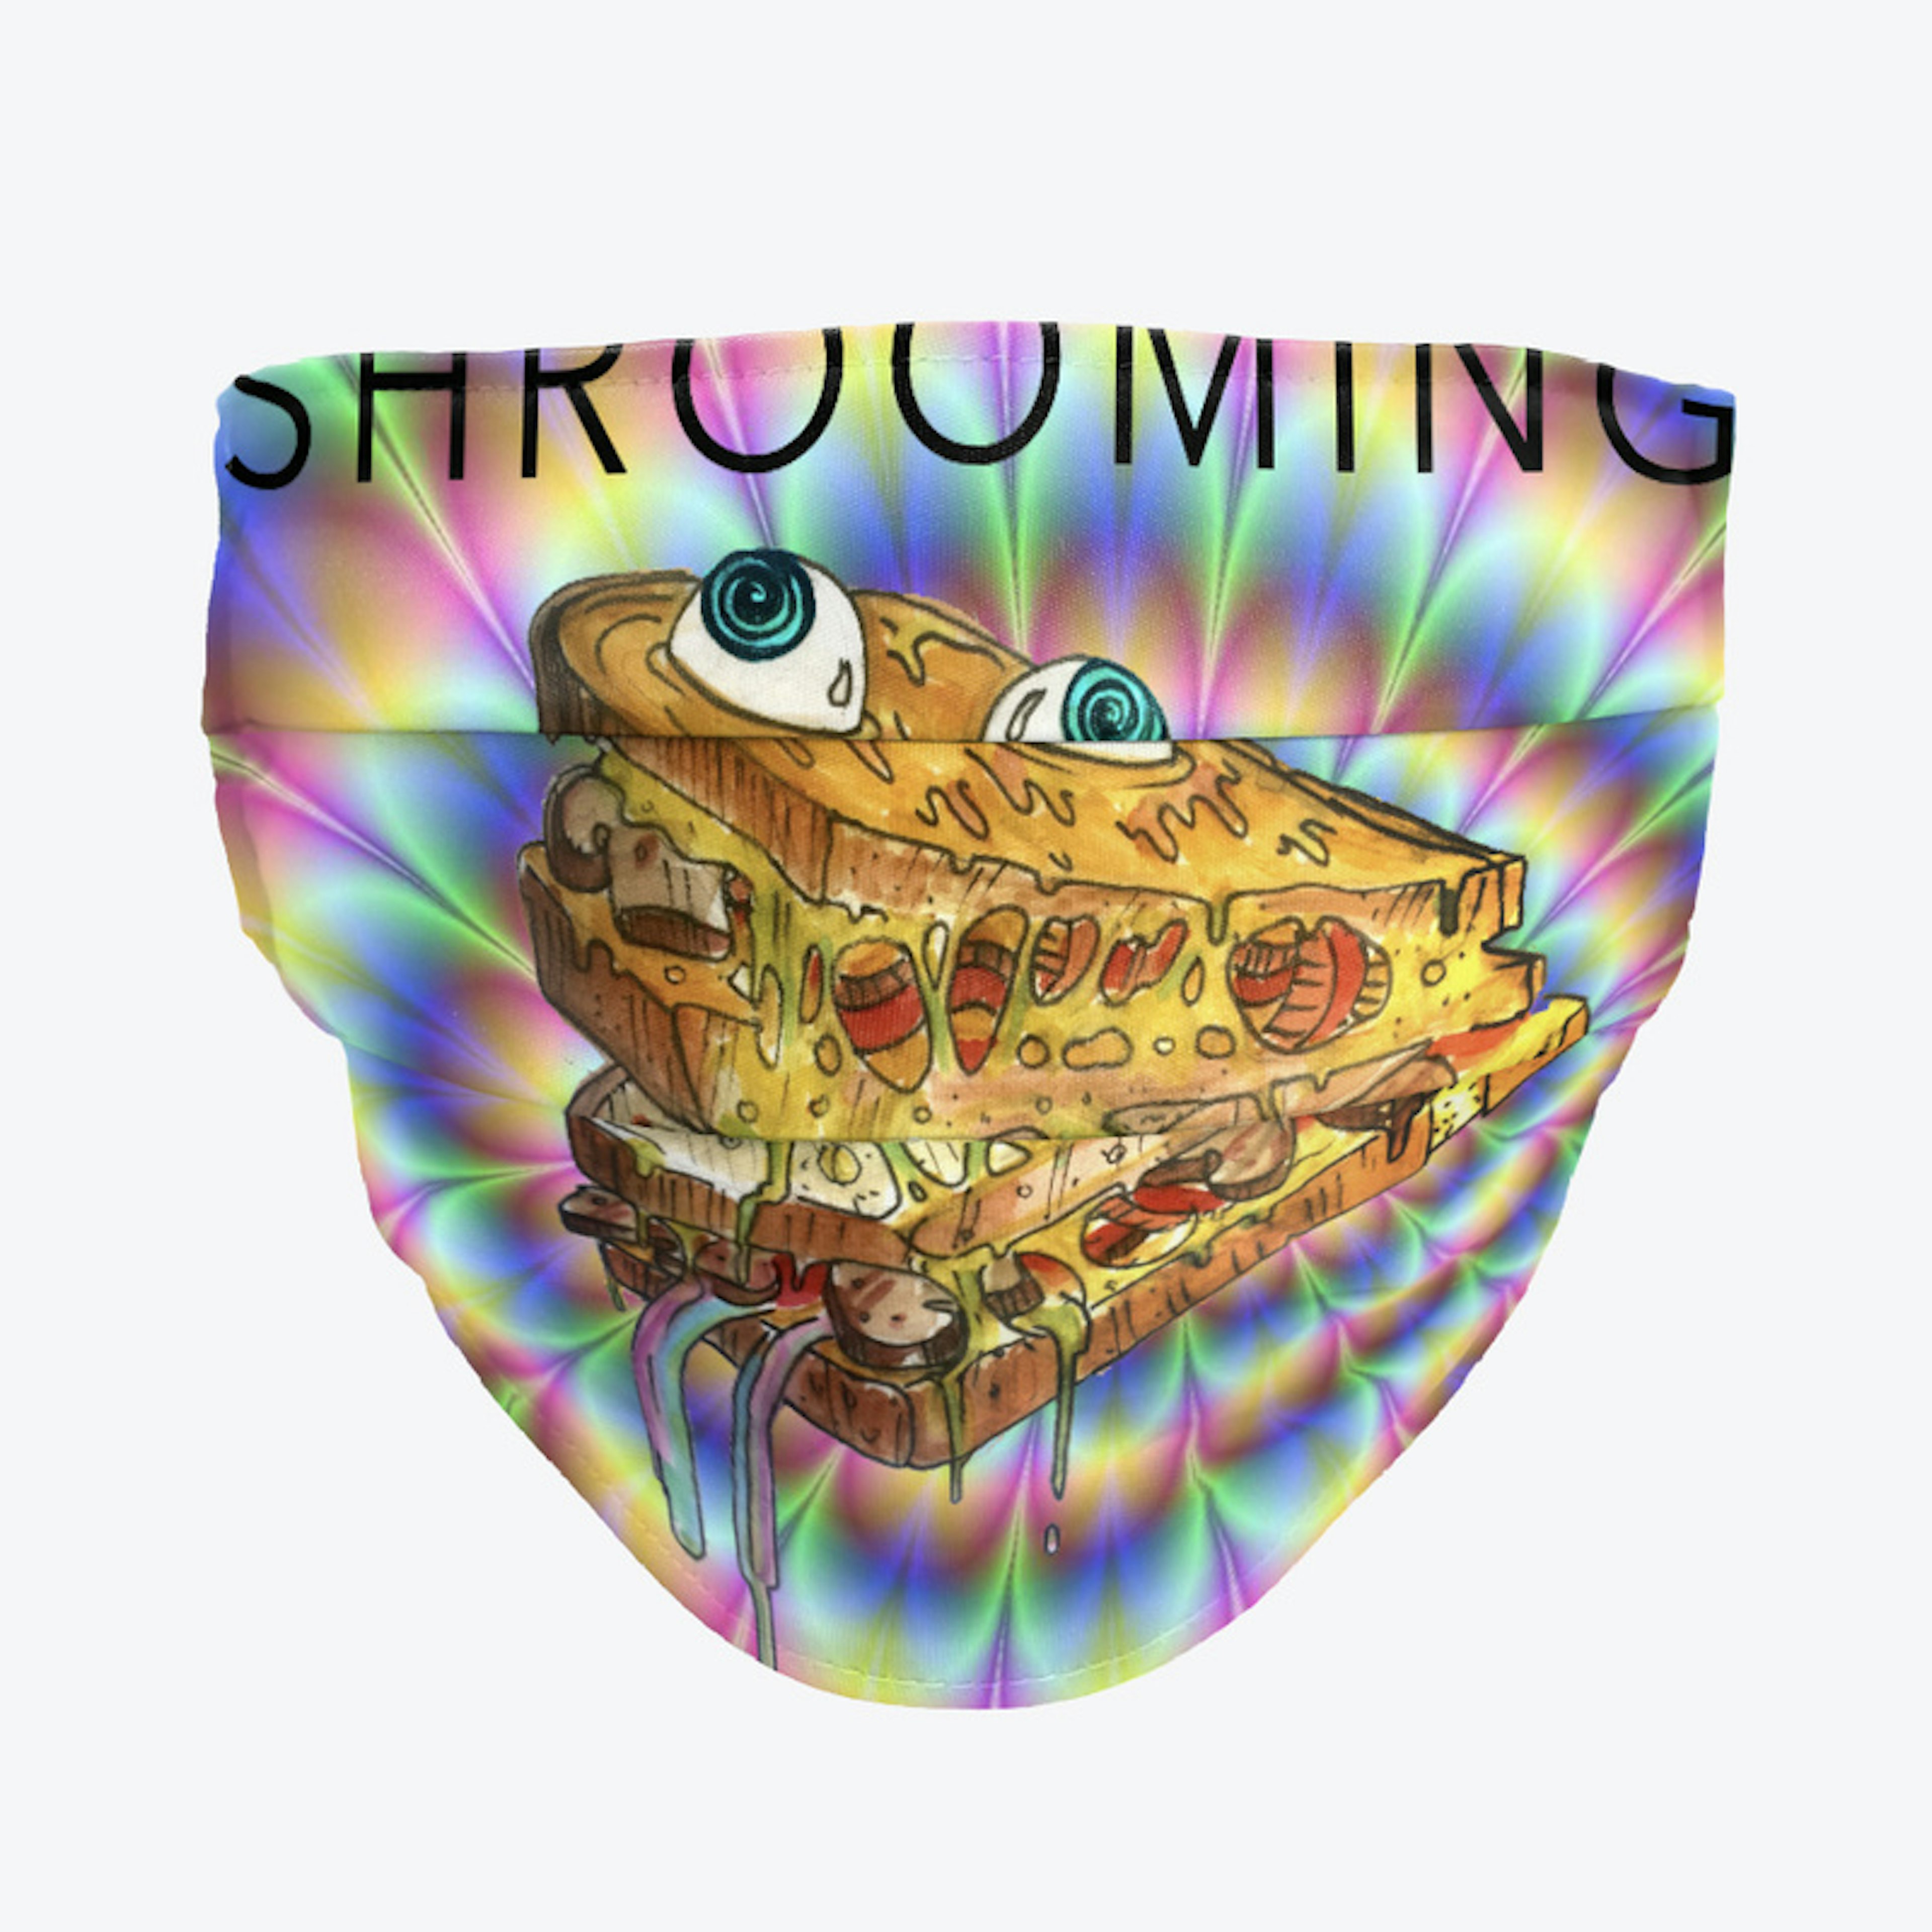 Shrooming Grilled Cheese Guy